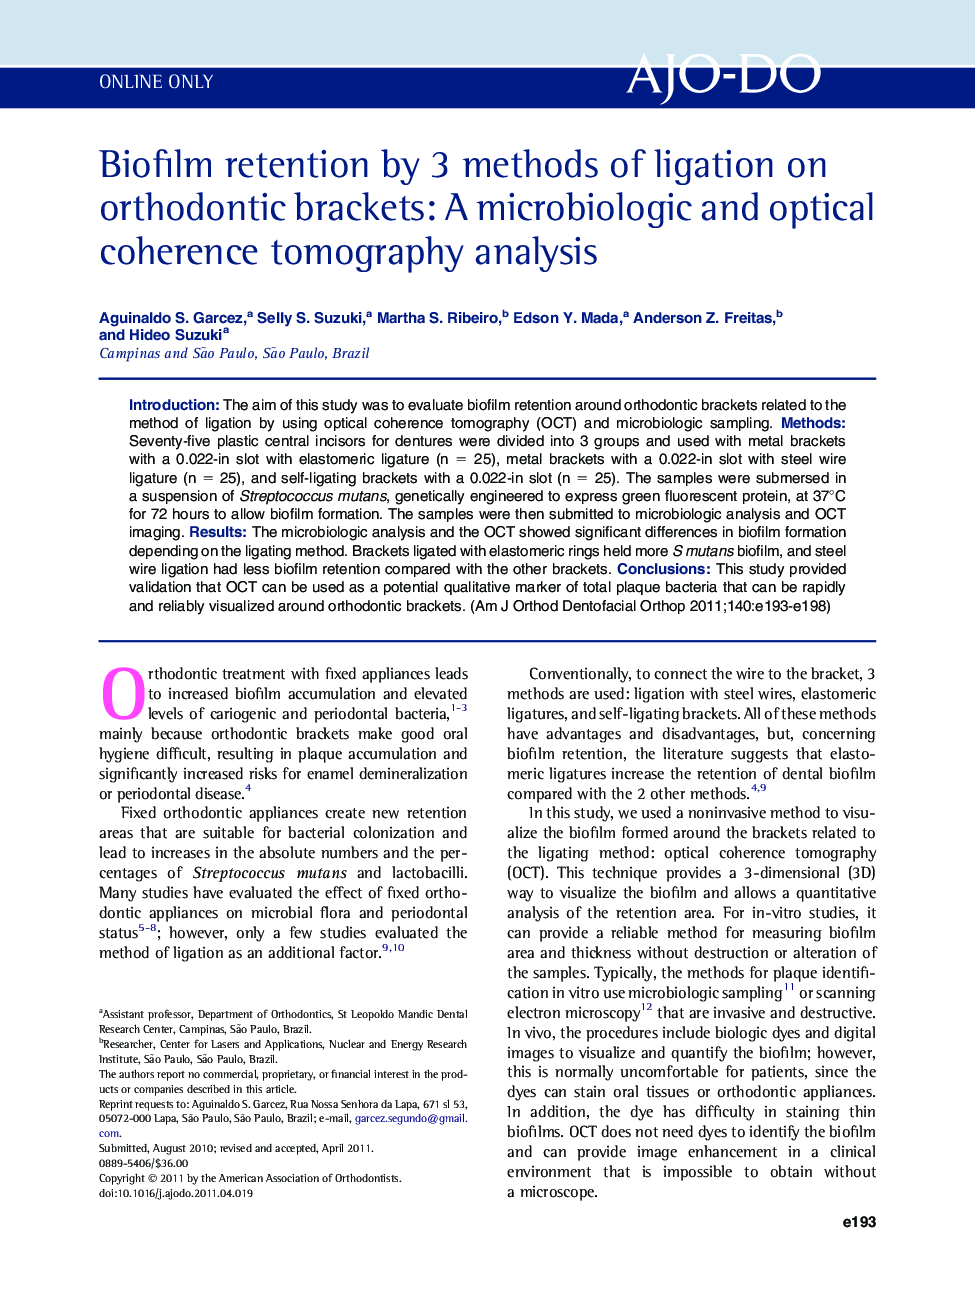 Biofilm retention by 3 methods of ligation on orthodontic brackets: A microbiologic and optical coherence tomography analysis 